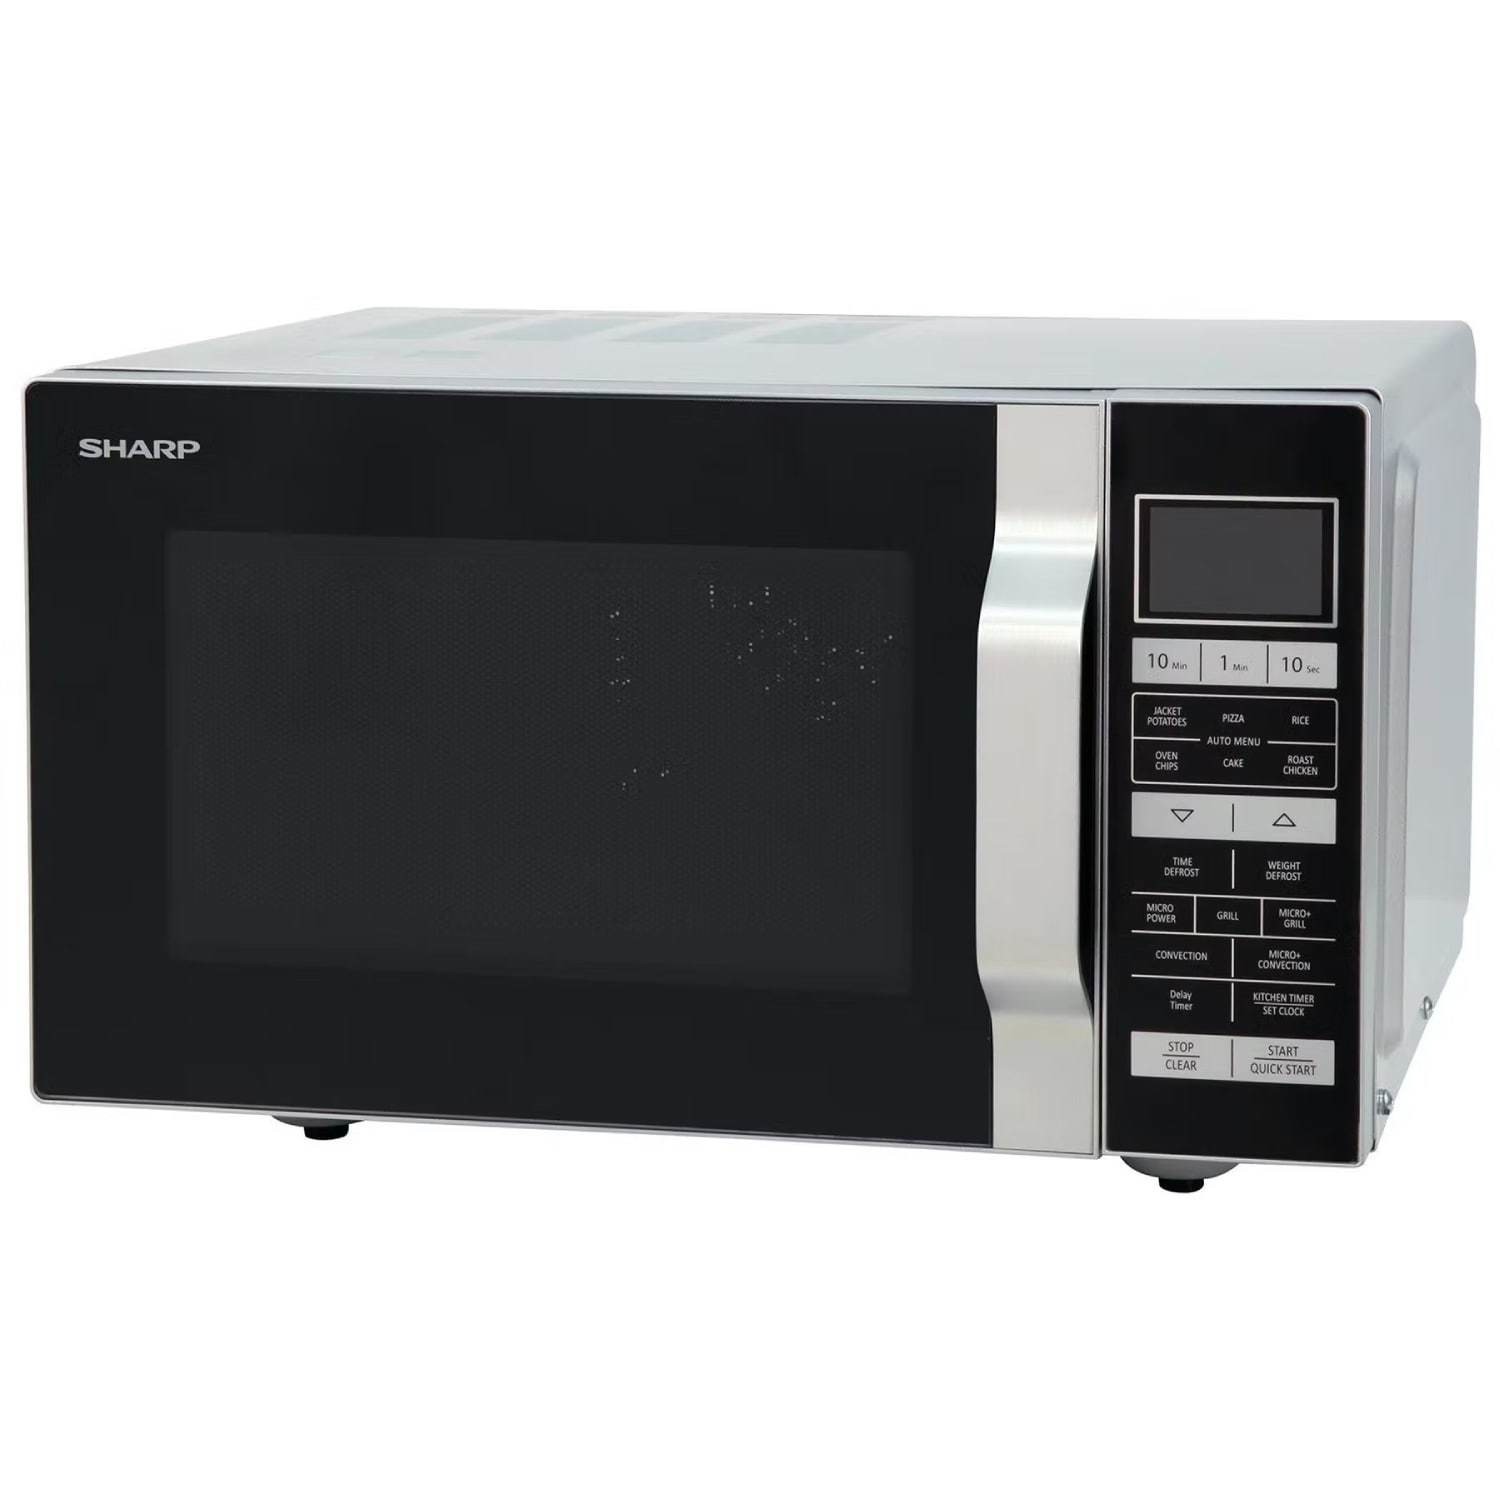 Sharp 25L Digital Combination Microwave Oven - Silver